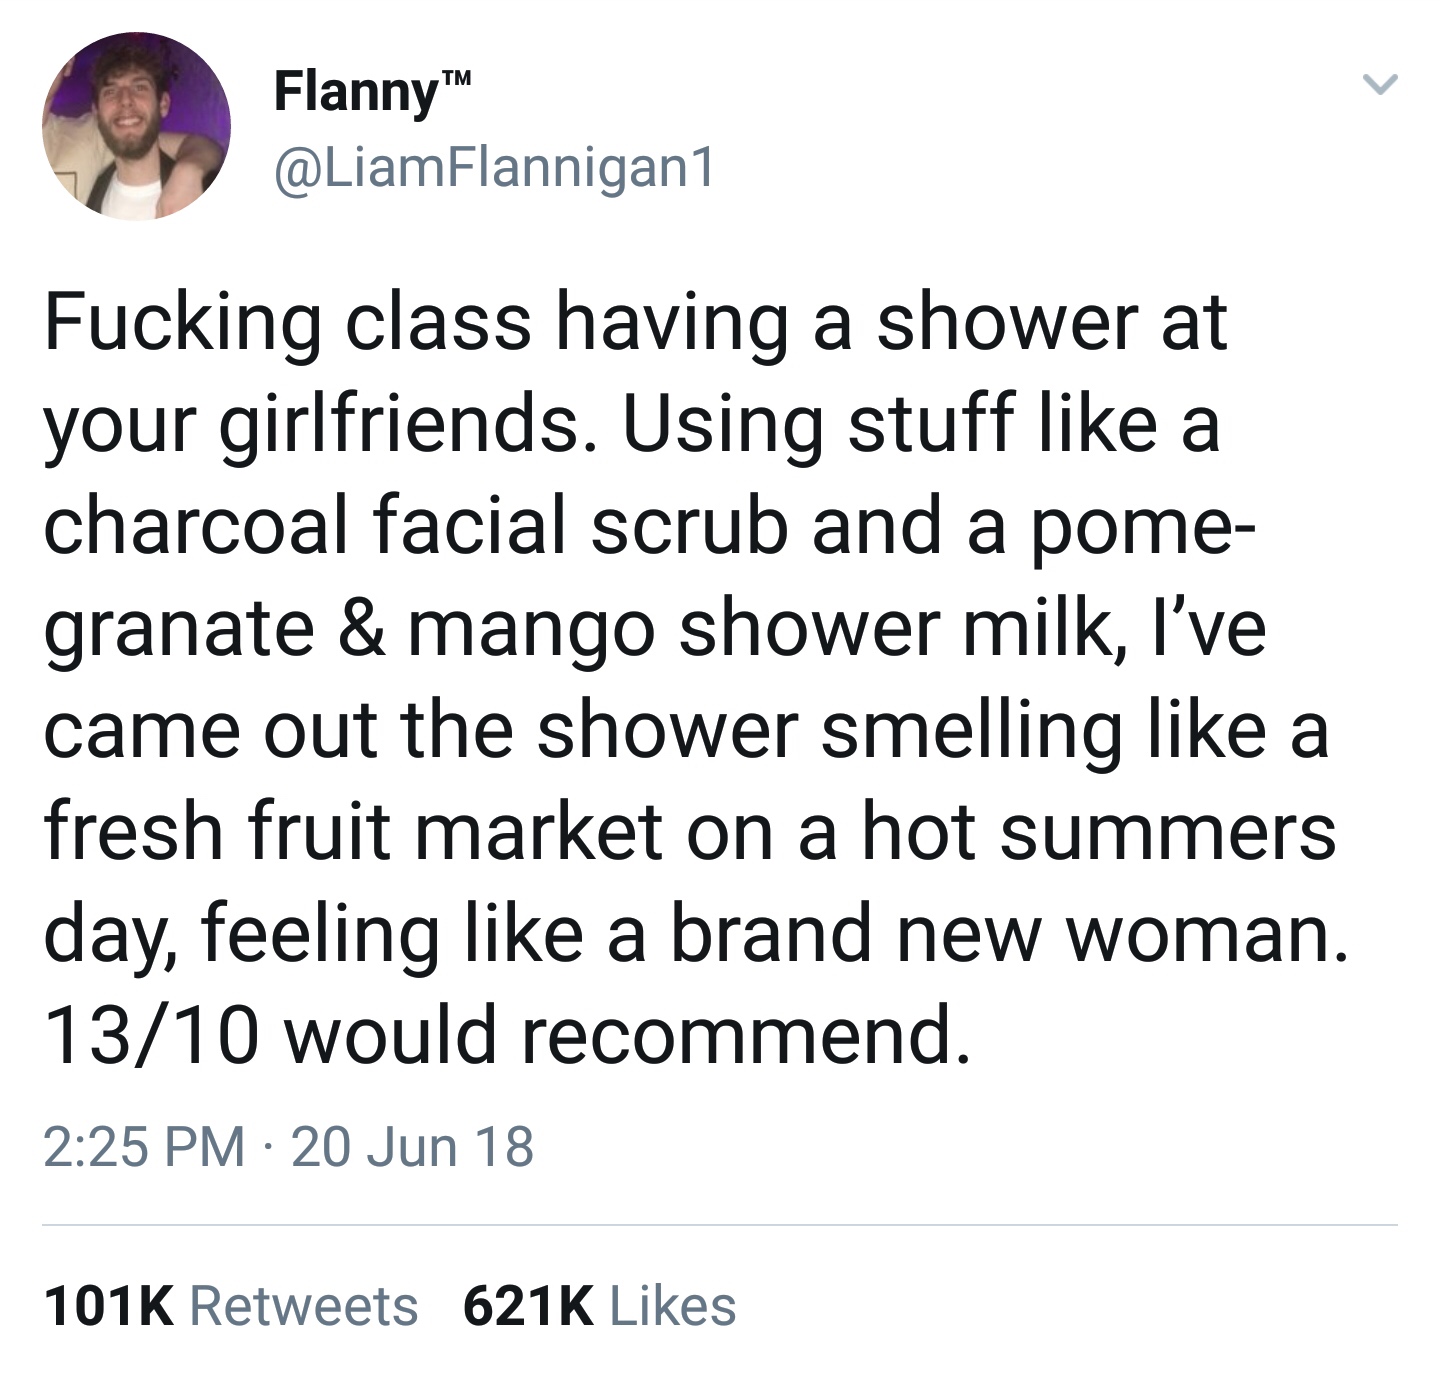 fair you have to have - Flanny Fucking class having a shower at your girlfriends. Using stuff a charcoal facial scrub and a pome granate & mango shower milk, I've came out the shower smelling a fresh fruit market on a hot summers day, feeling a brand new 